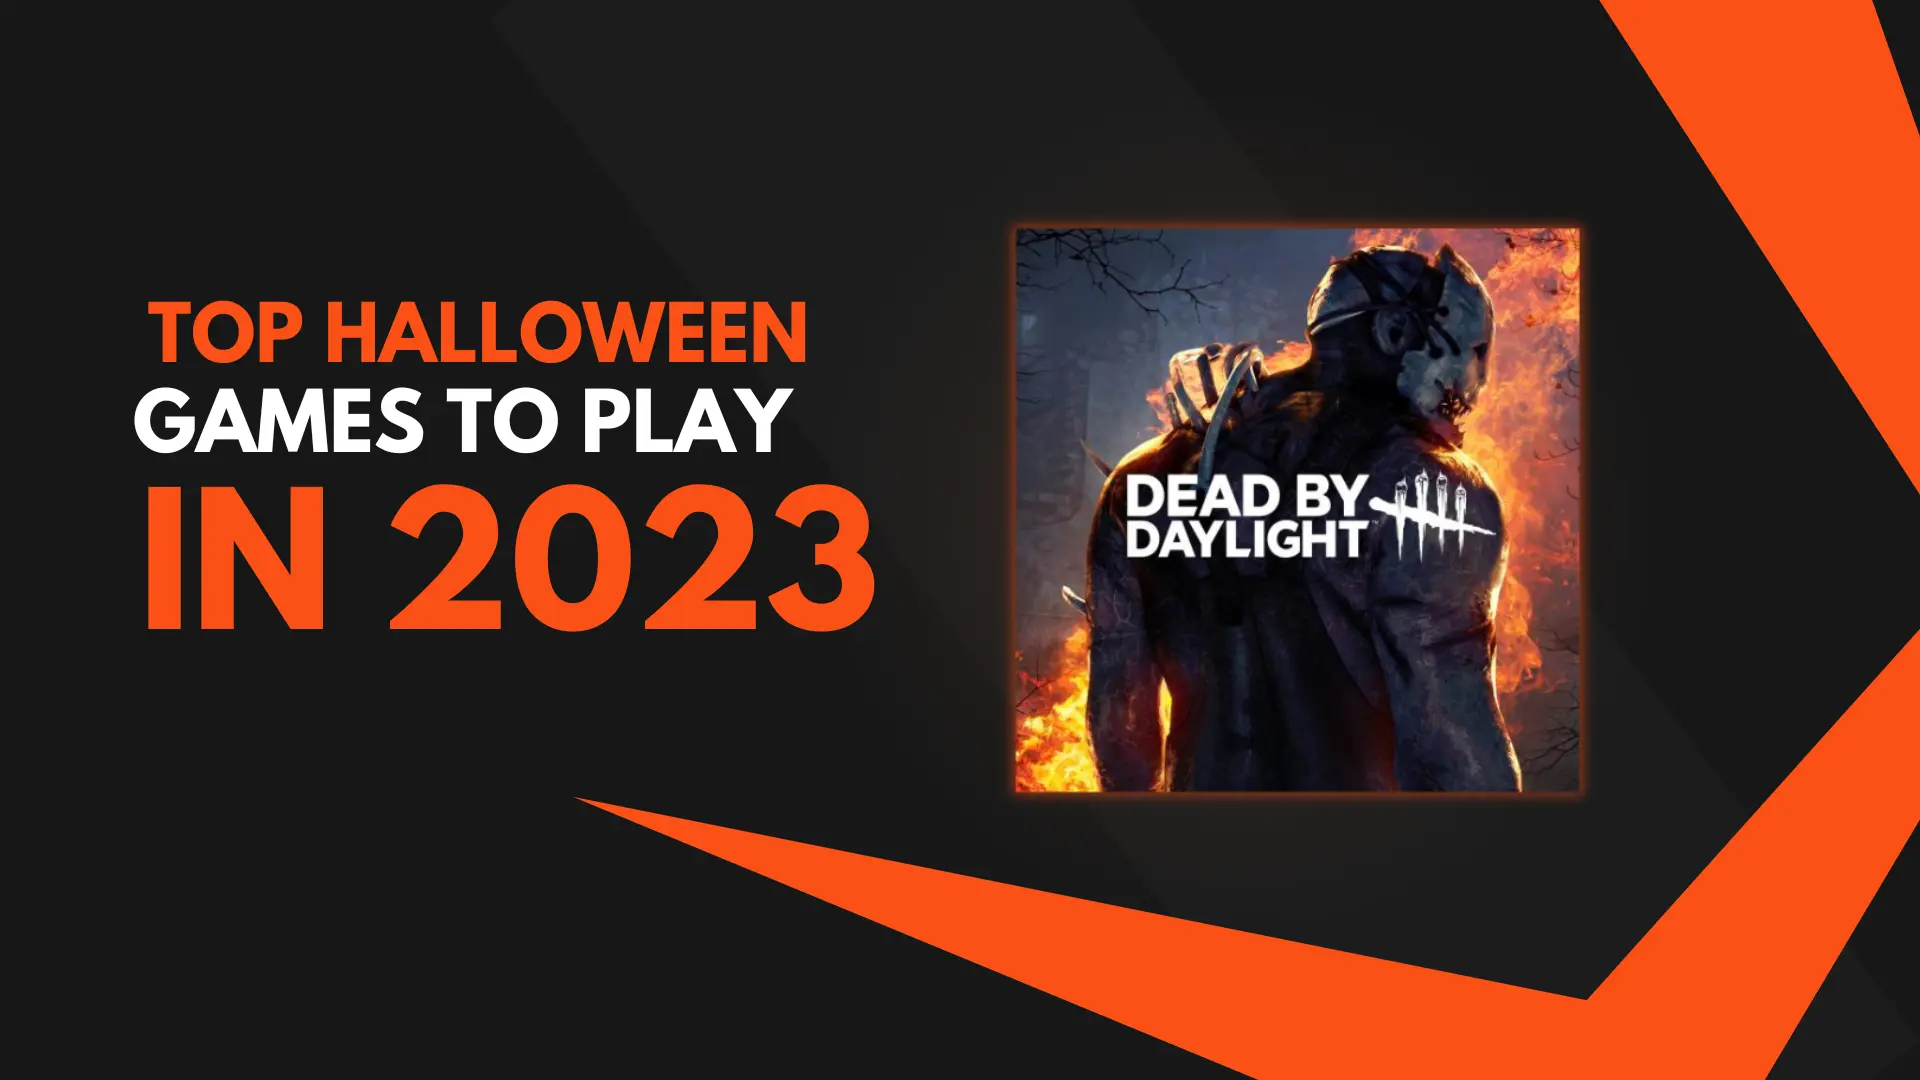 Top 9 Halloween Games To Play In 2023 - Games Req